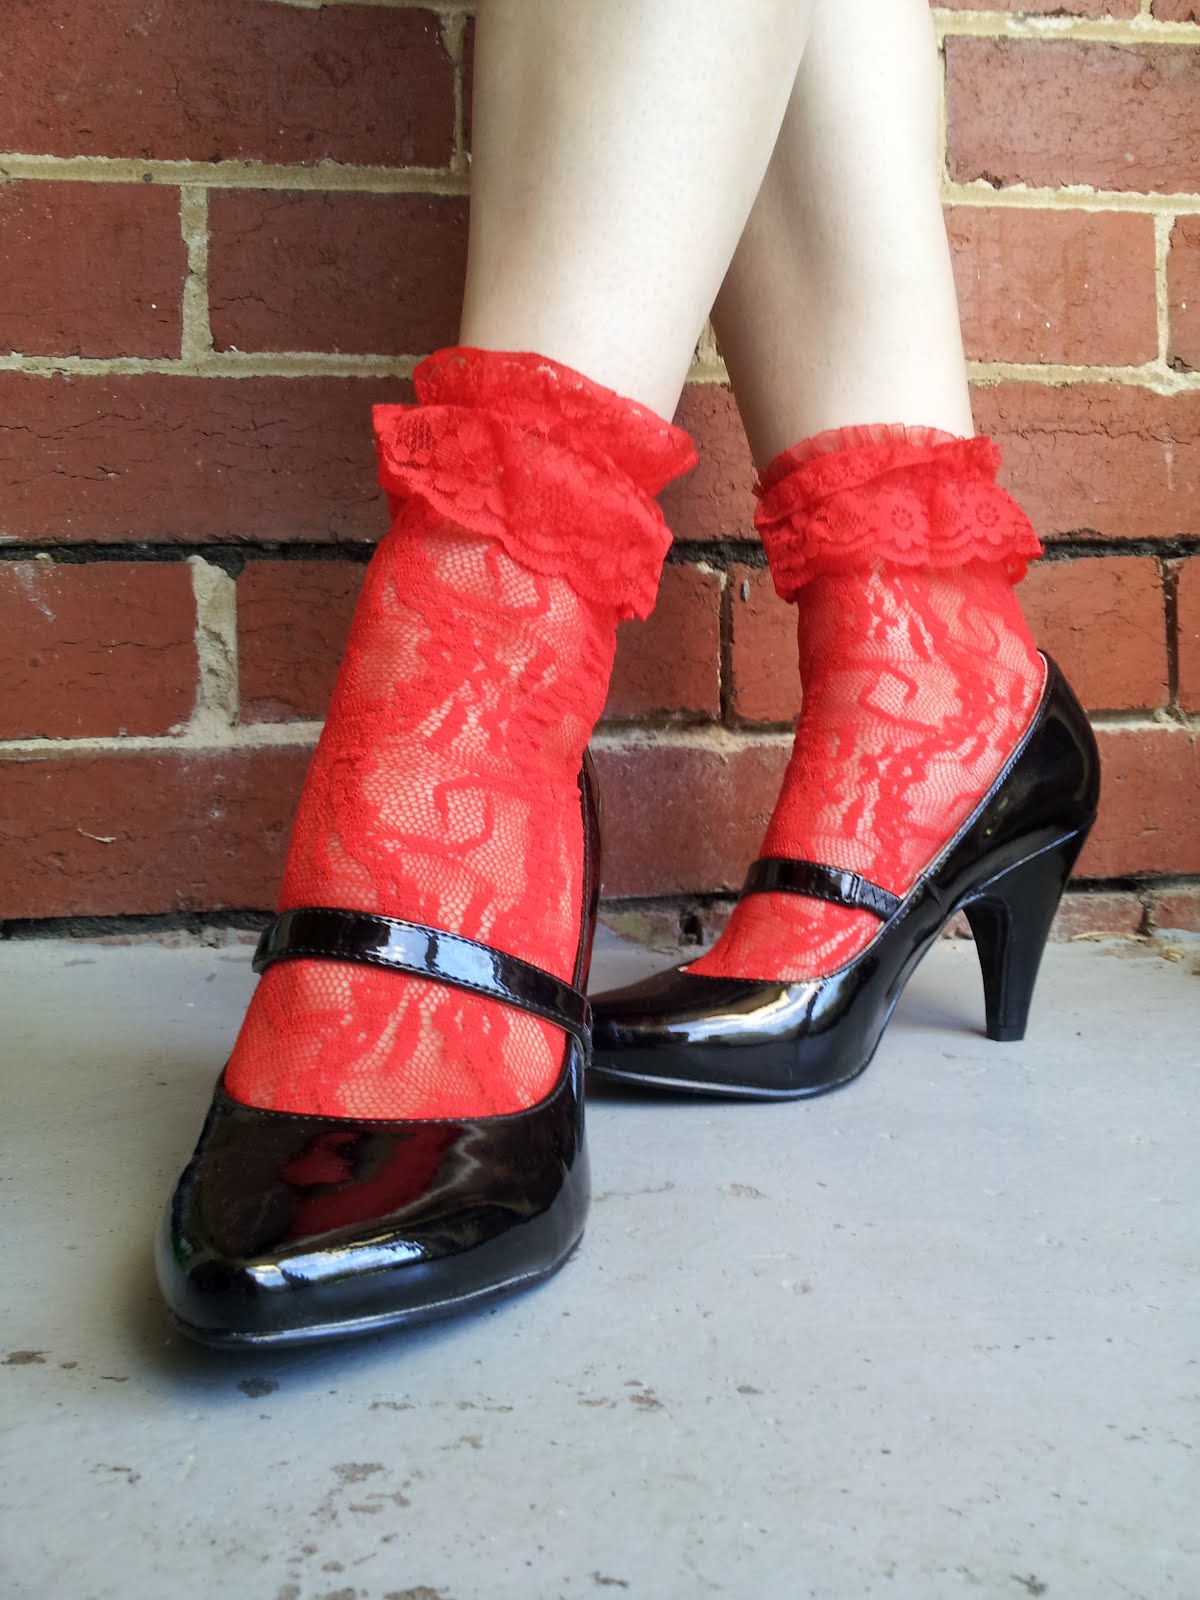 Miss Claire's Sewing Blog: Socks & shoes